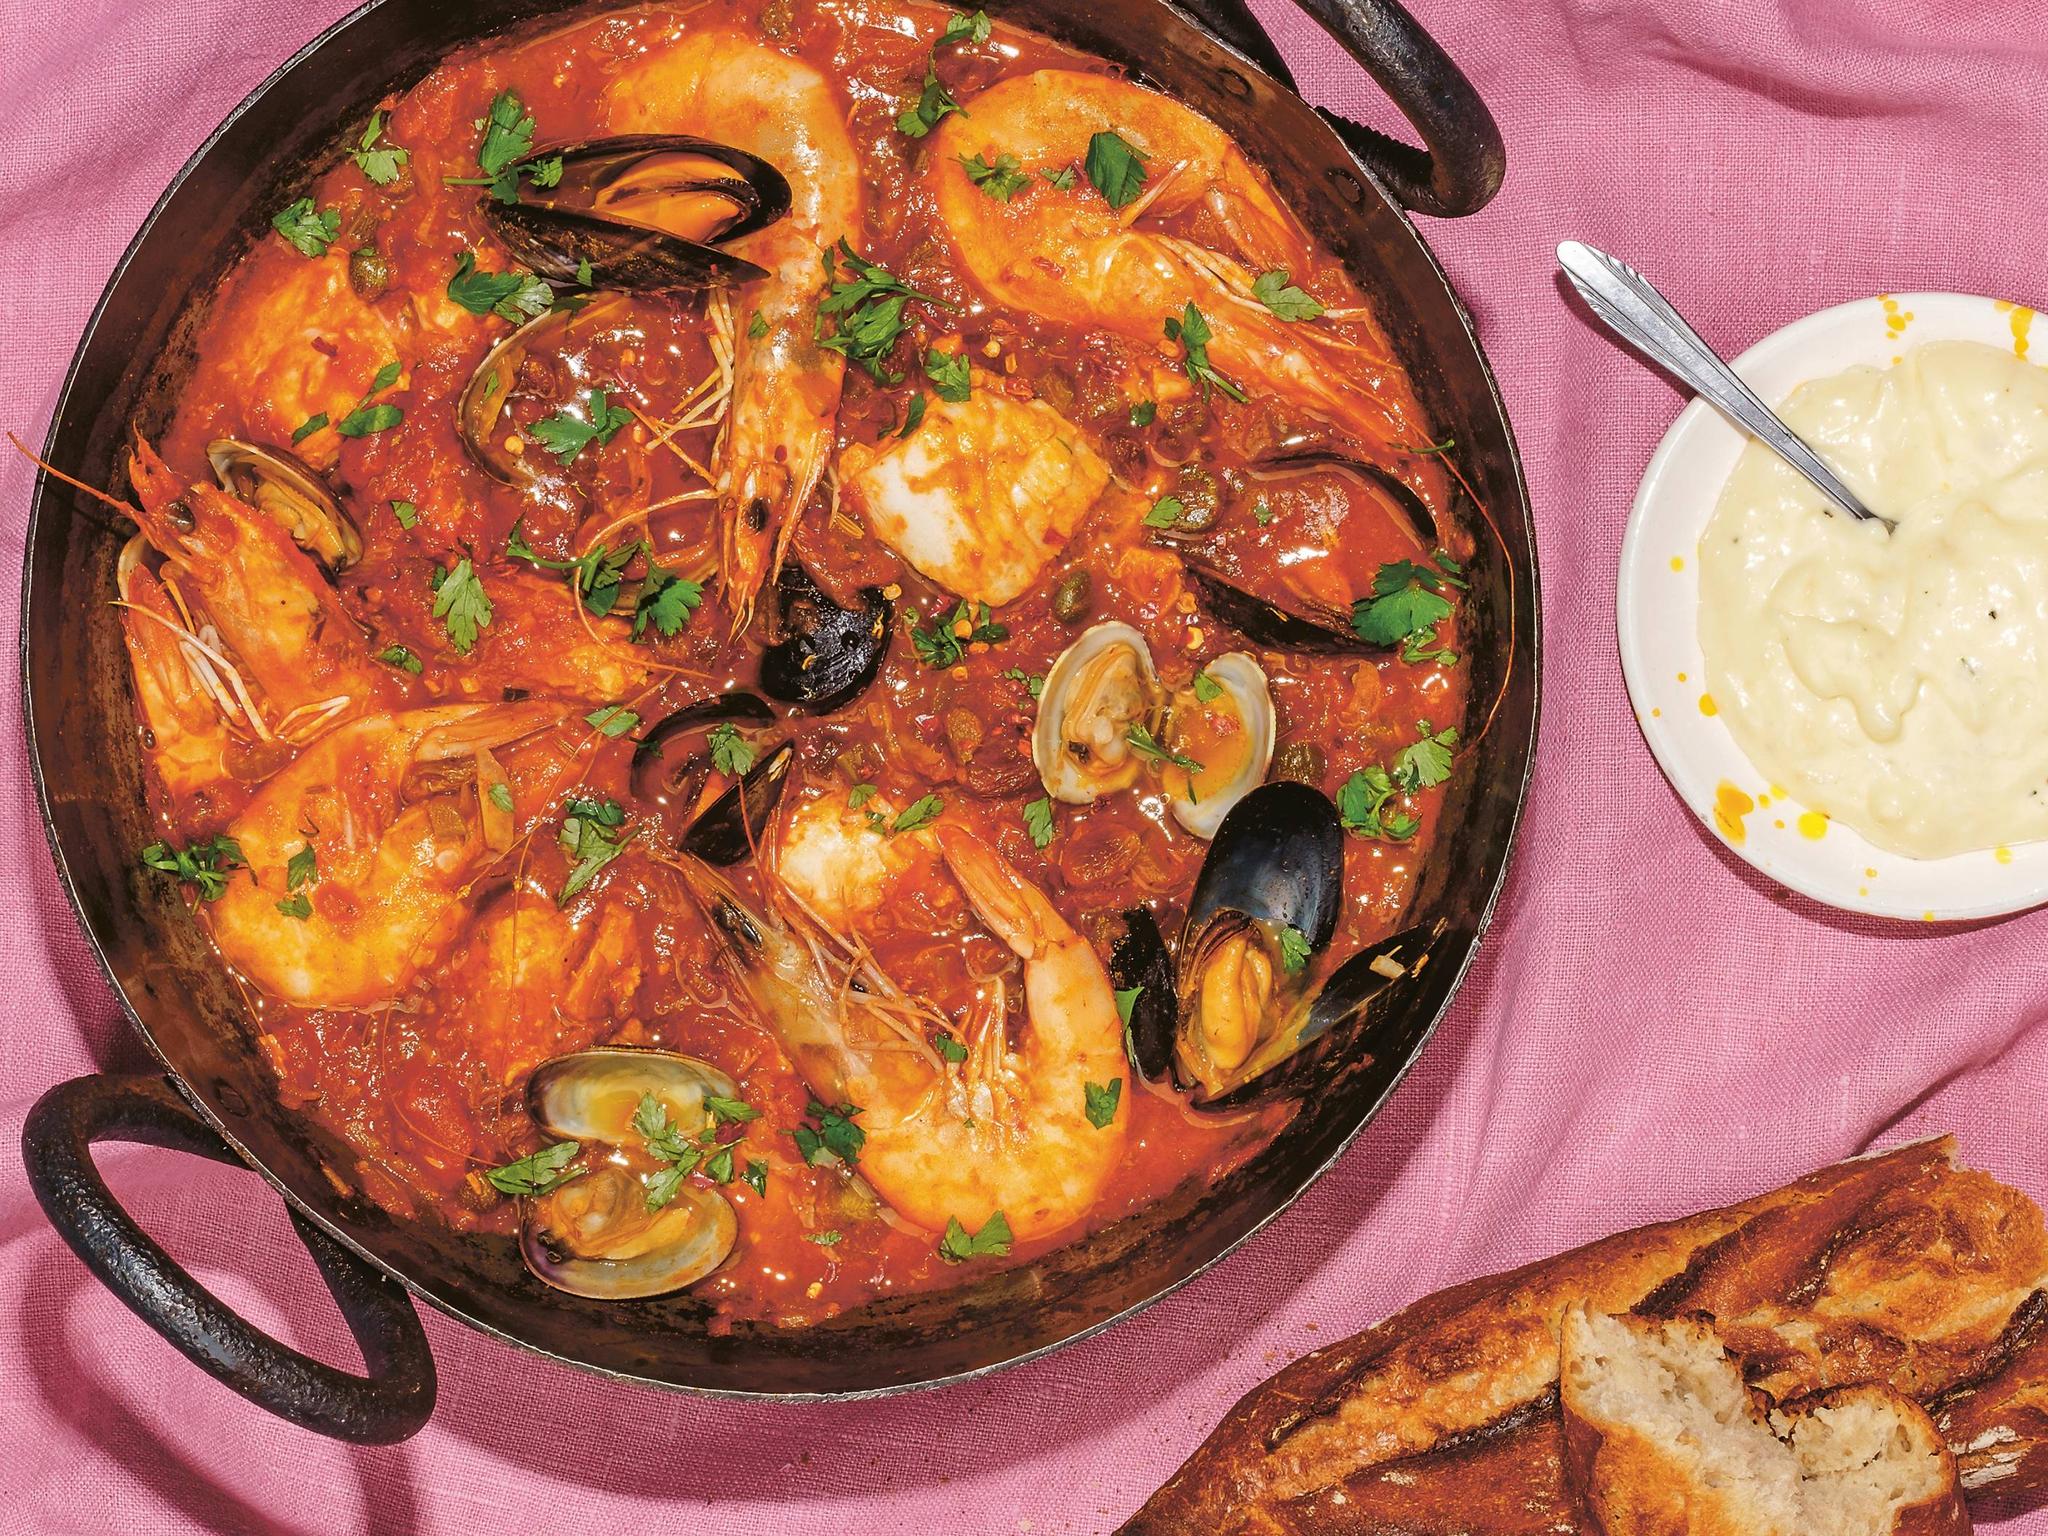 This Sicilian seafood stew is the perfect Sunday dish | The Australian